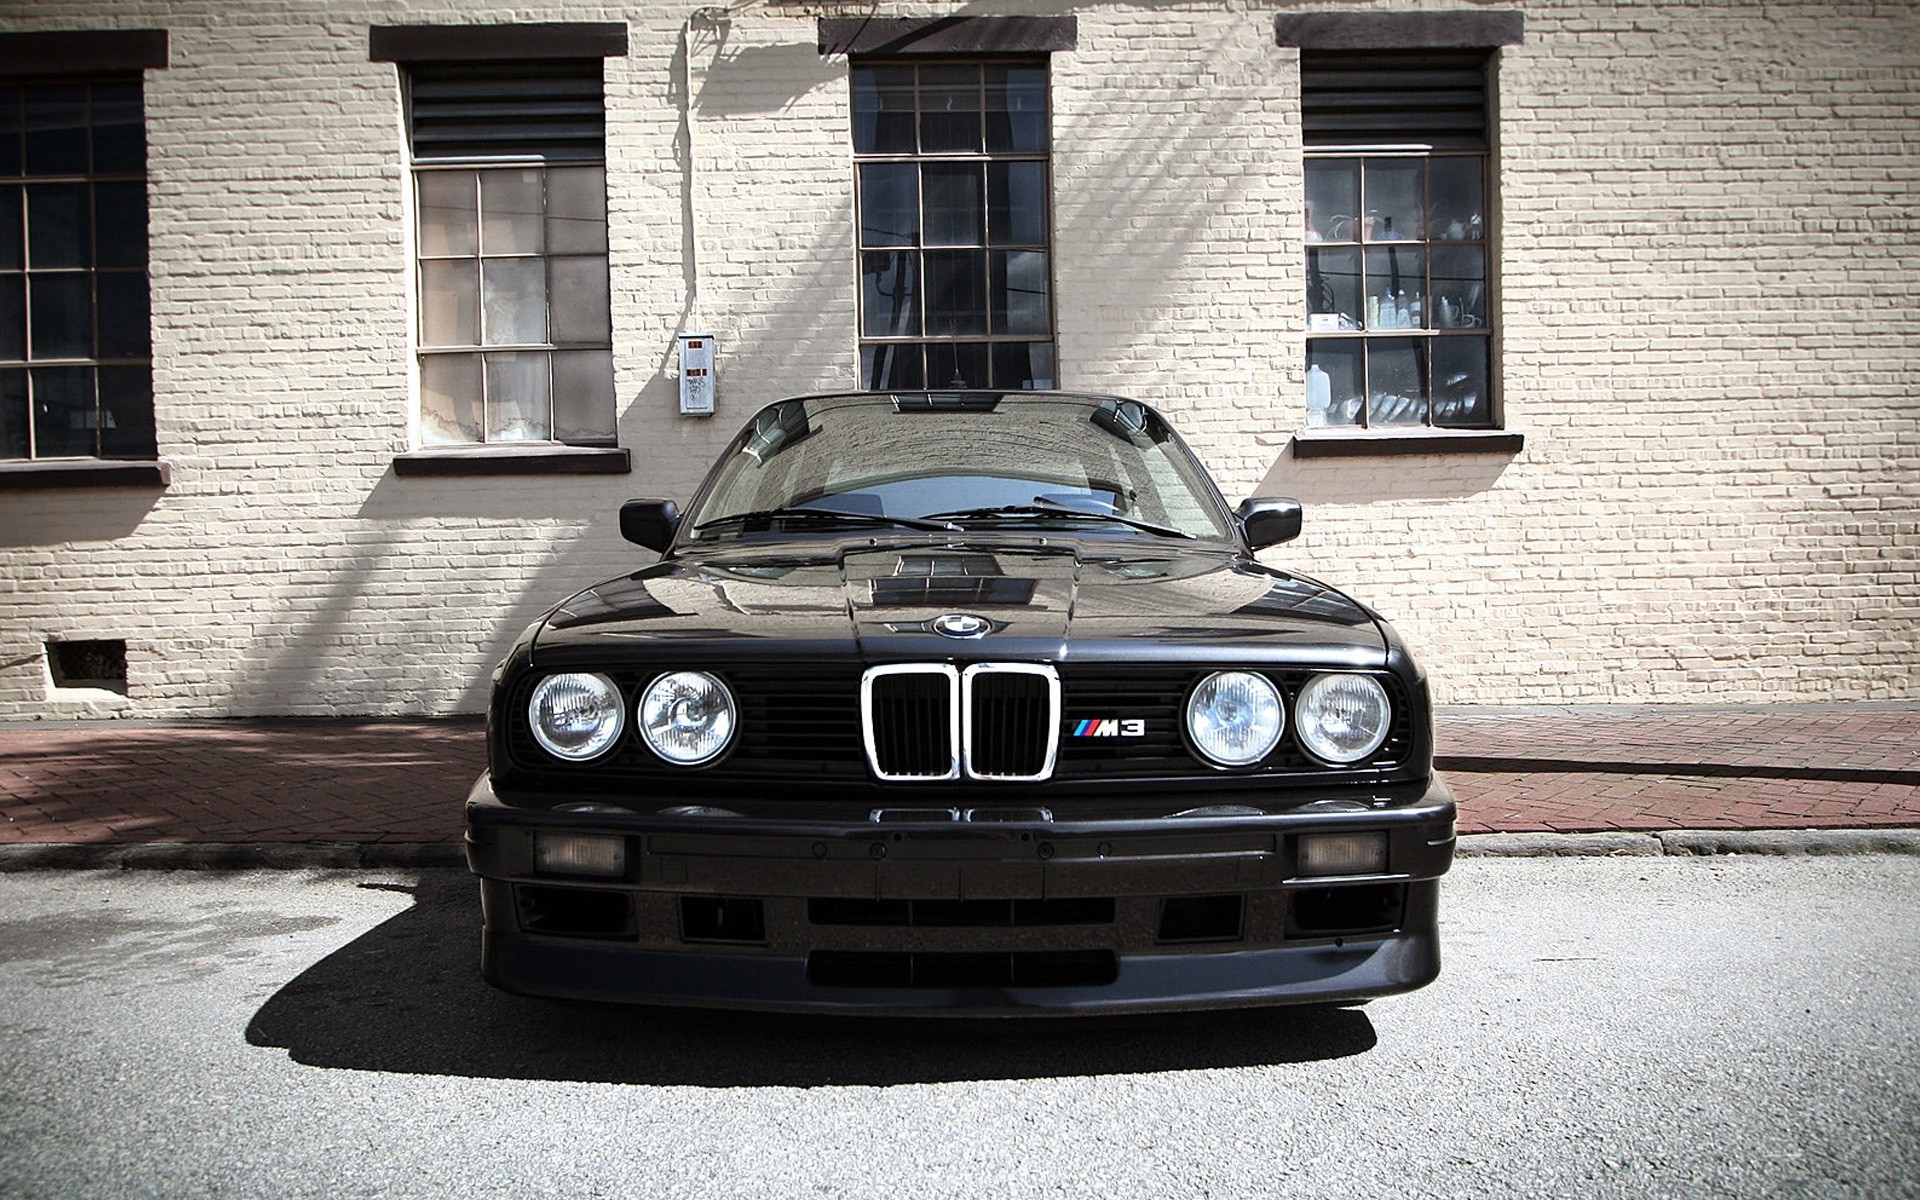 Black Bmw E 40 Near The Wall Wallpapers And Images Wallpapers Pictures Photos